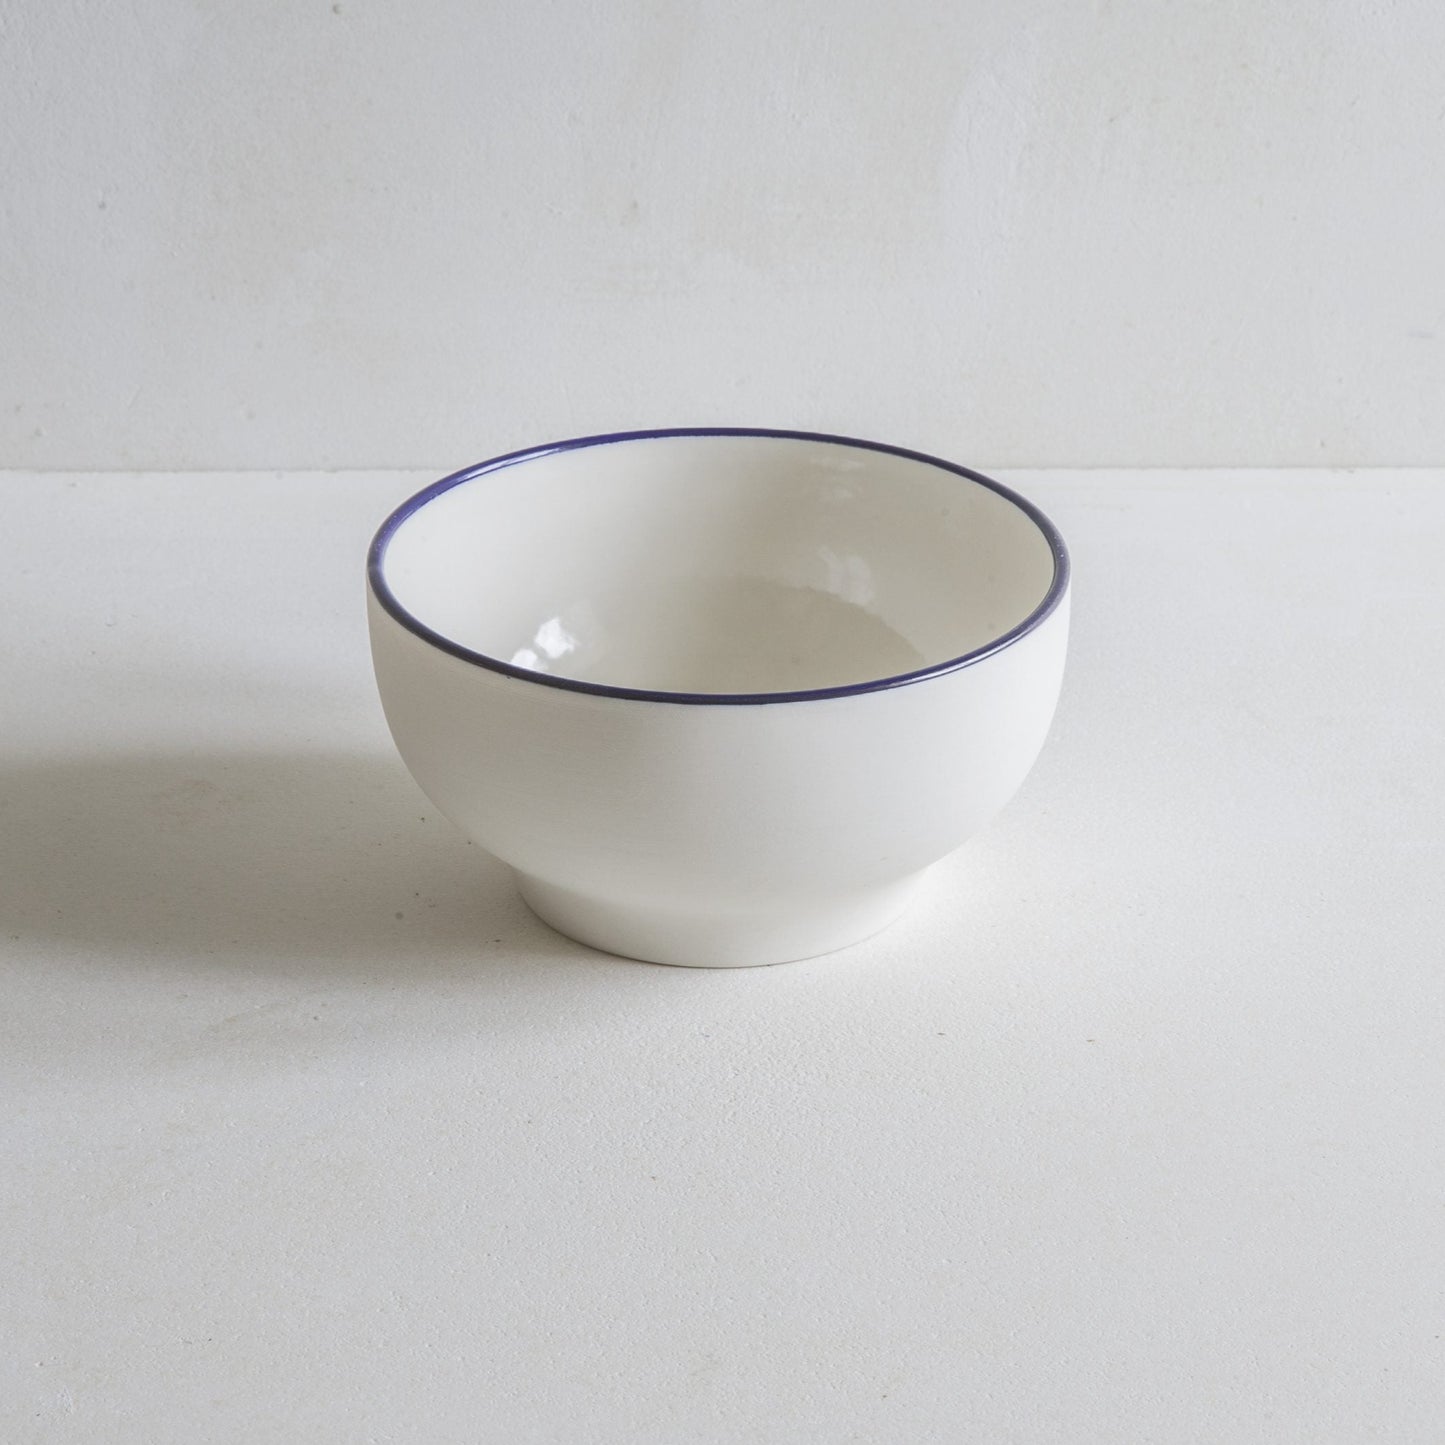 Simple Bowl with a blue rim